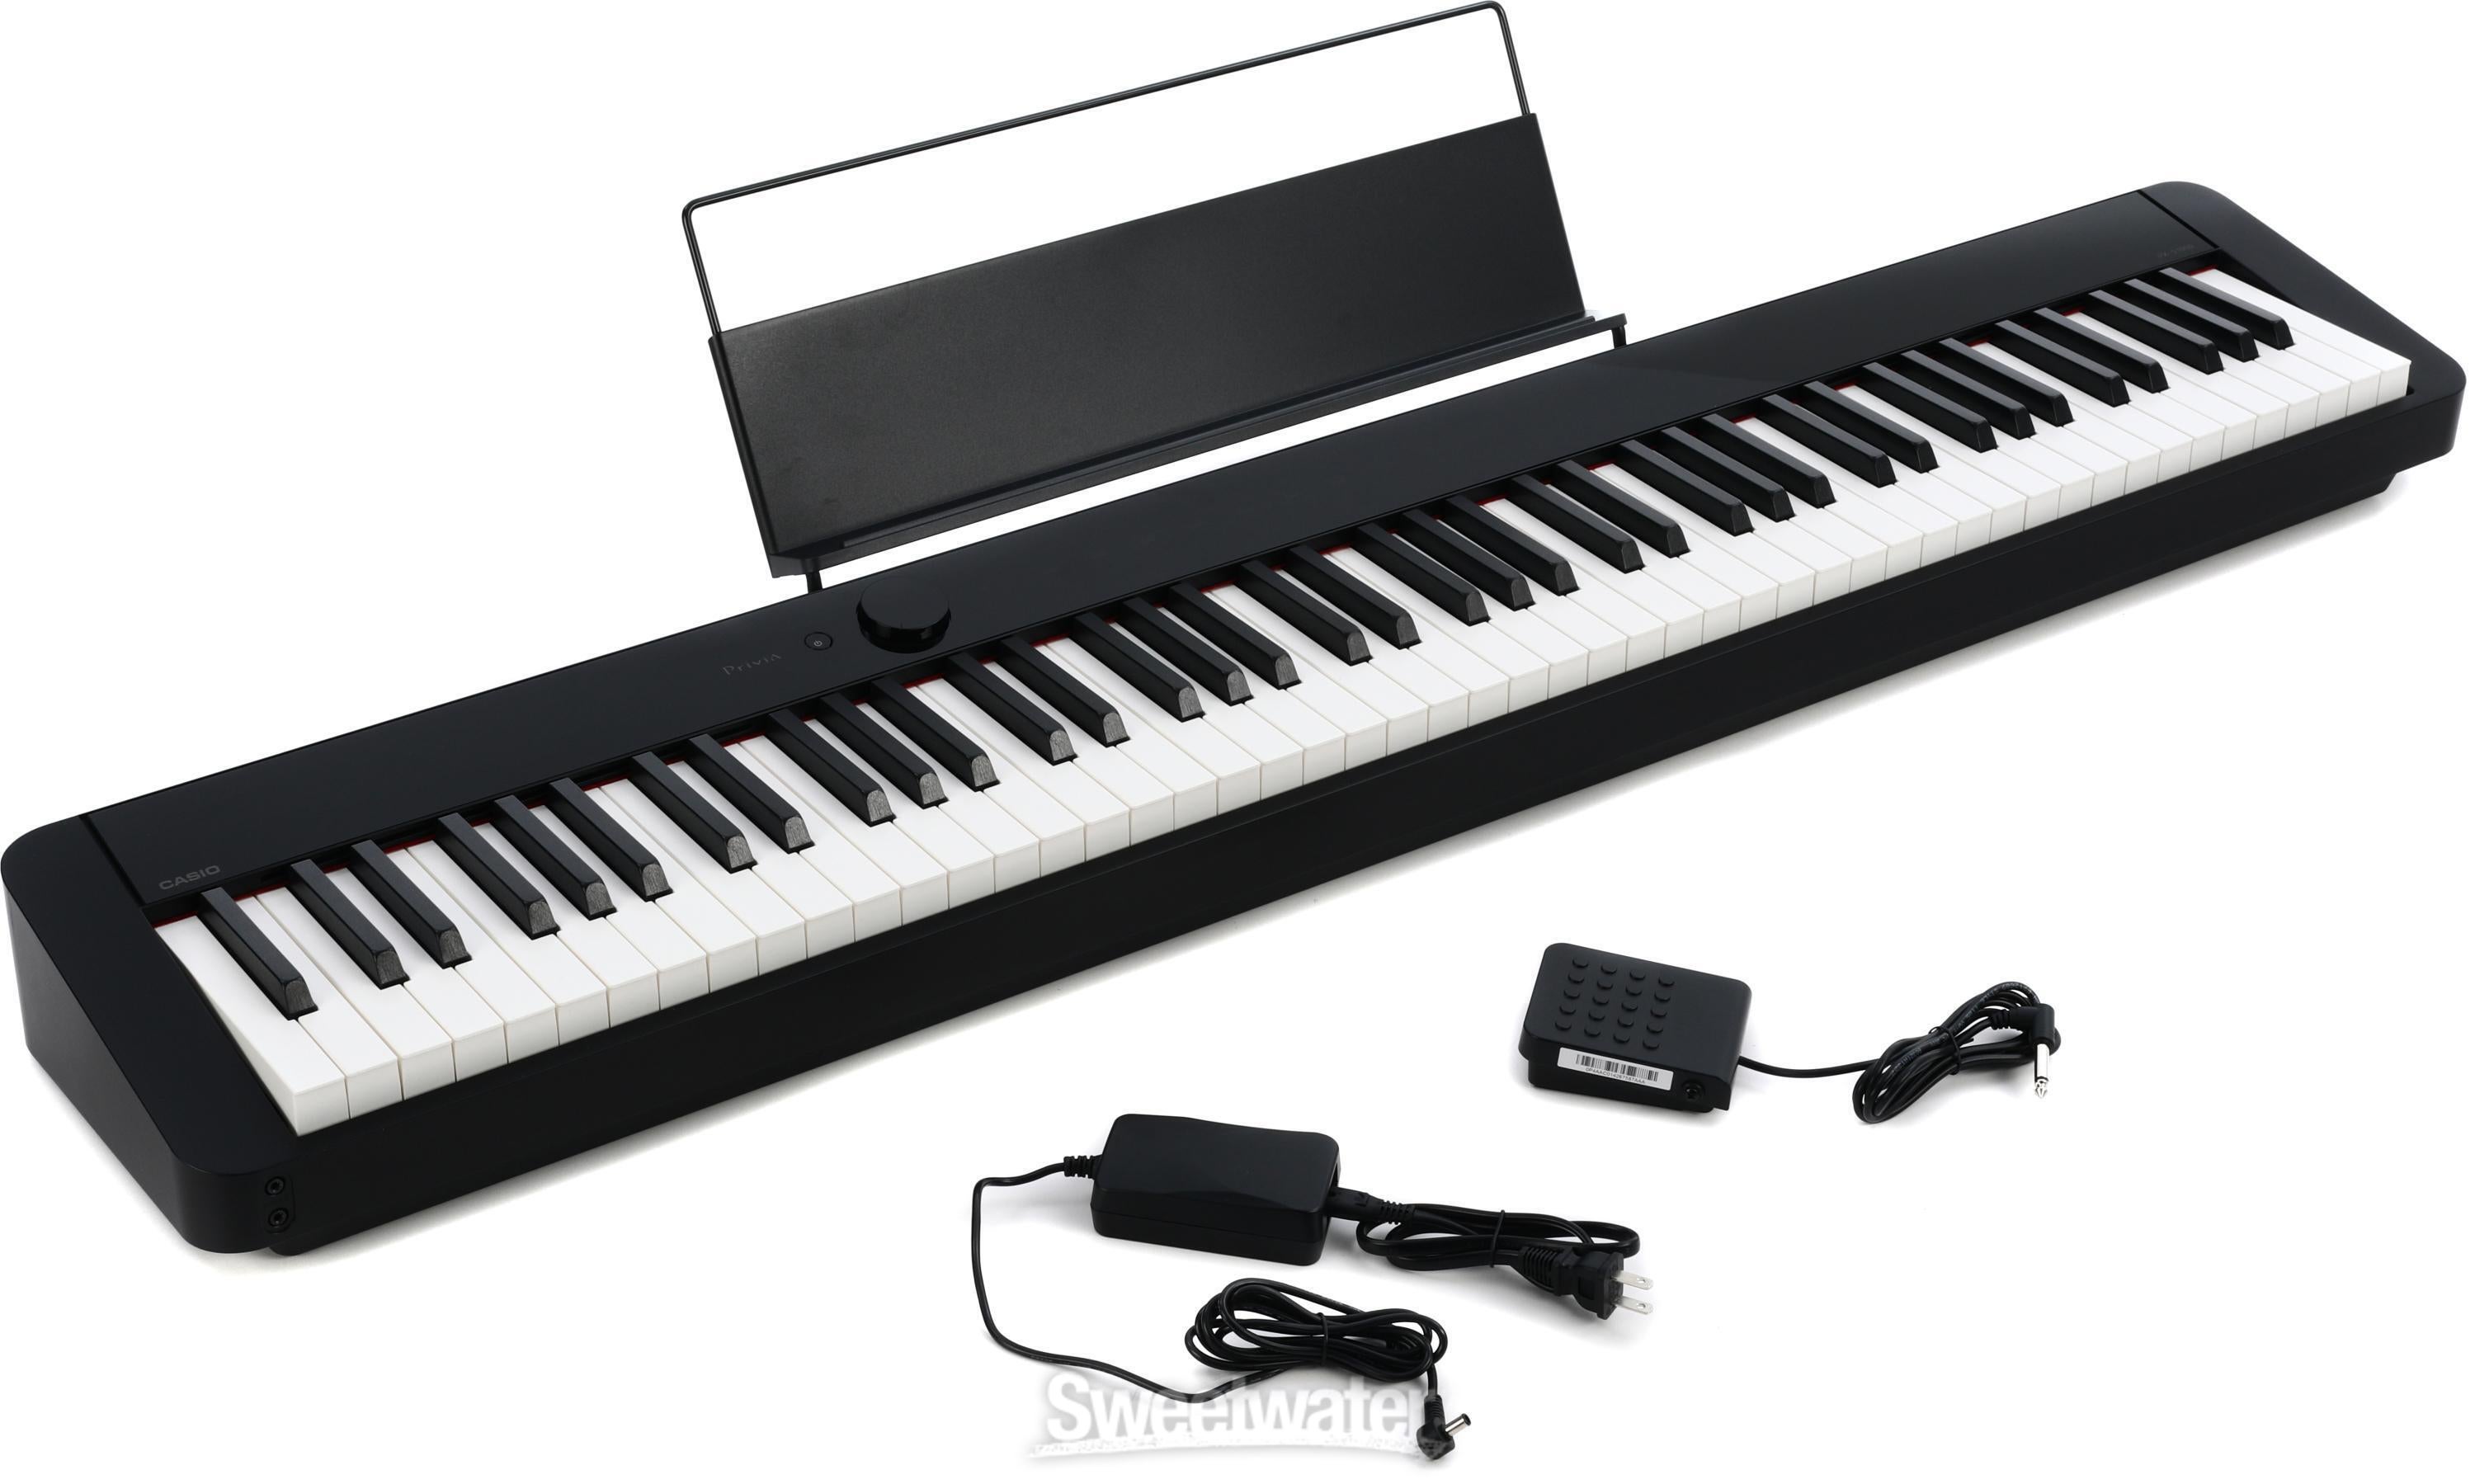 Casio Privia PX-S1000 Digital Piano - Black Reviews | Sweetwater